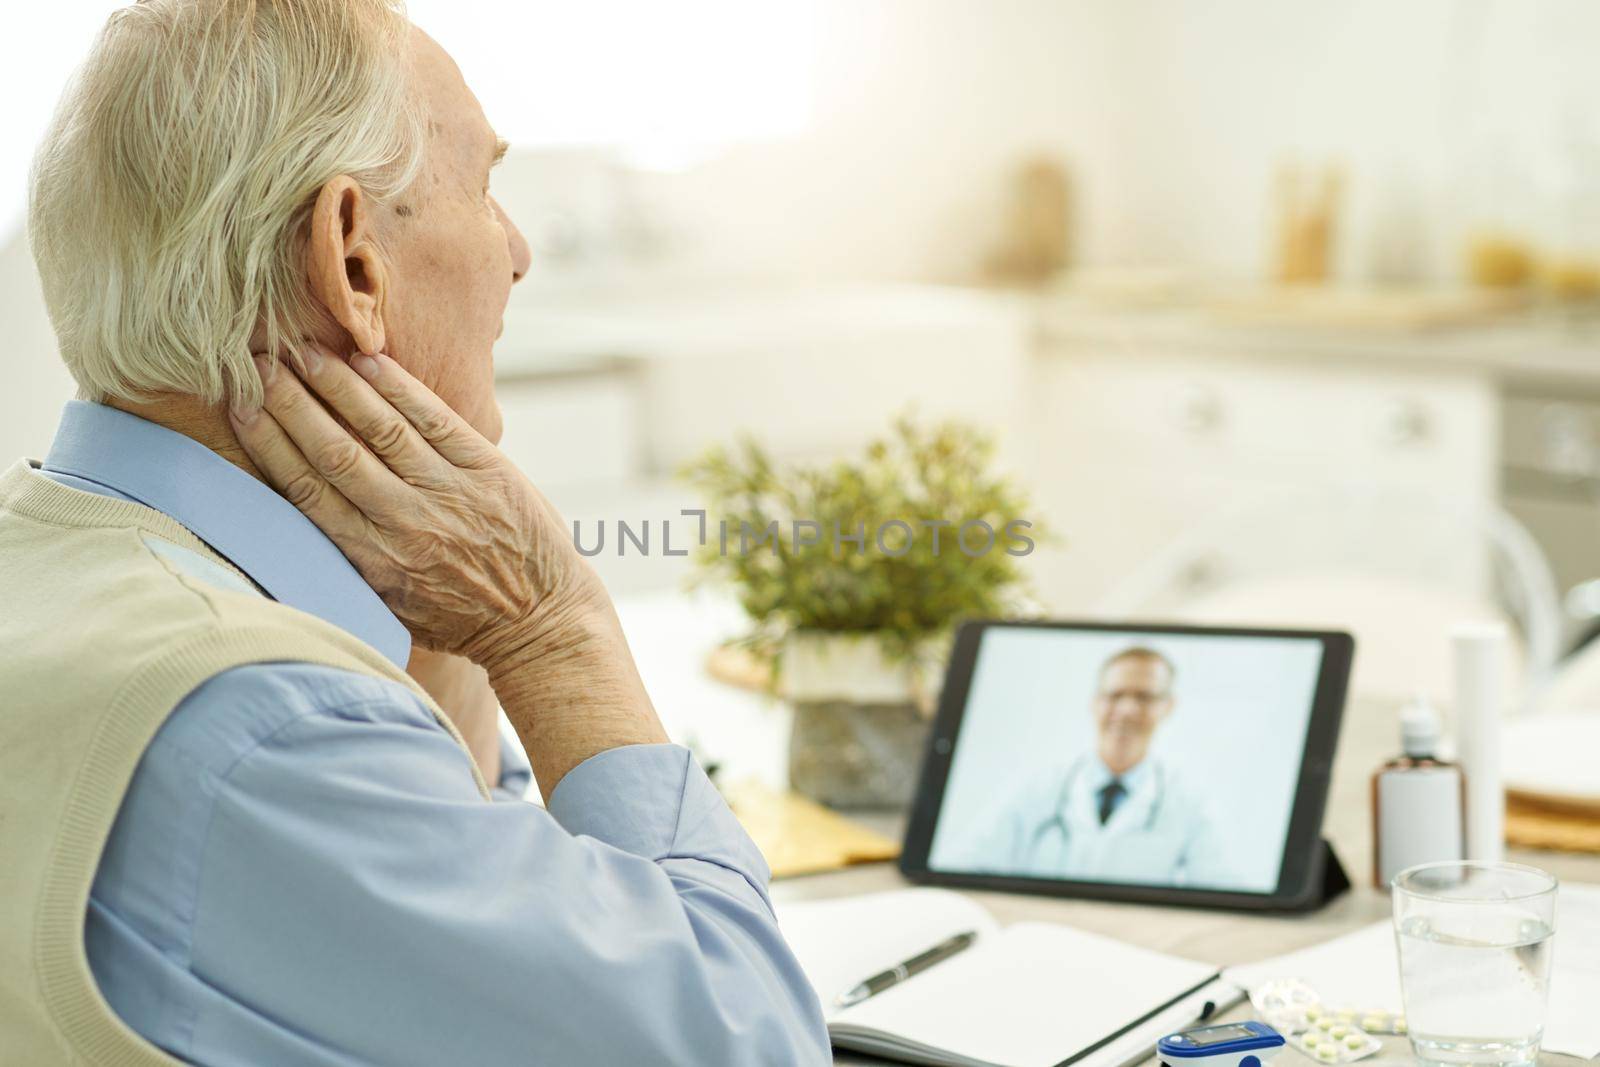 Copy space photo of aged man looking at tablet screen while having a video-calling with medical specialist